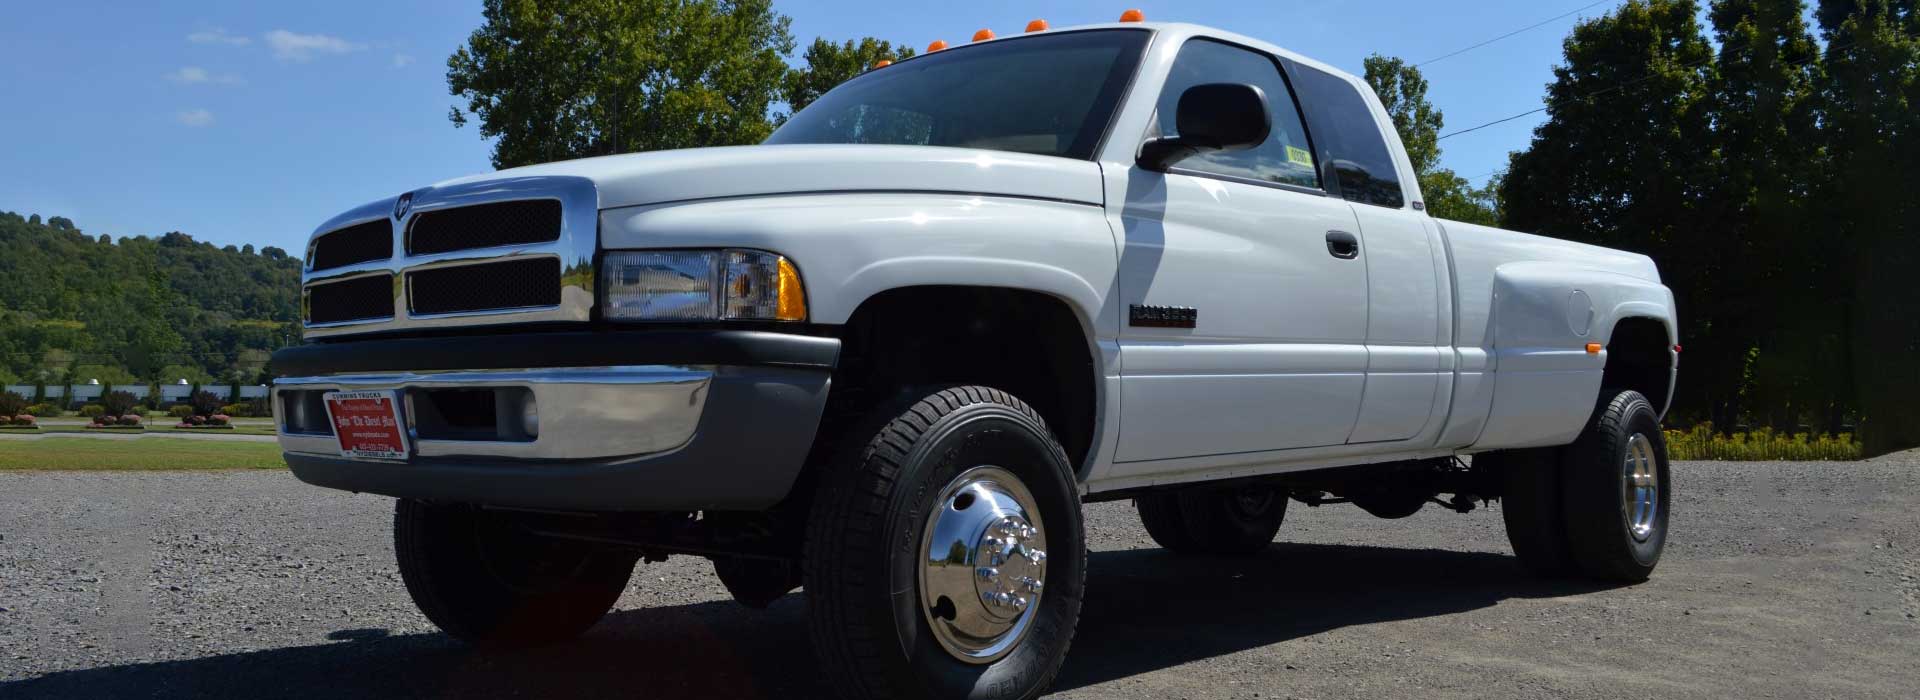 Cummins trucks for sale caresource federal simple choice silver providers